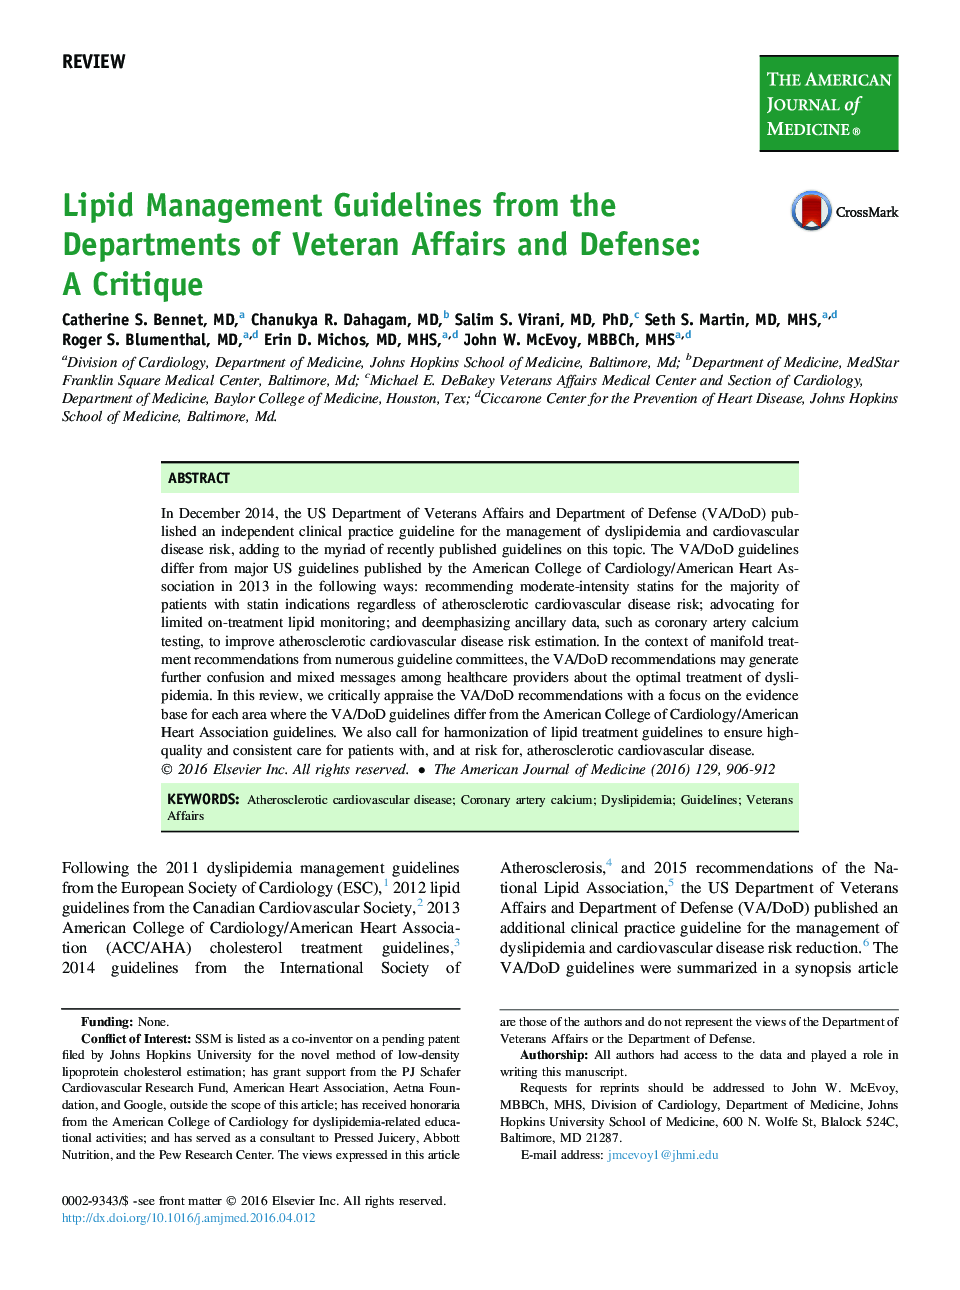 Lipid Management Guidelines from the Departments of Veteran Affairs and Defense: A Critique 